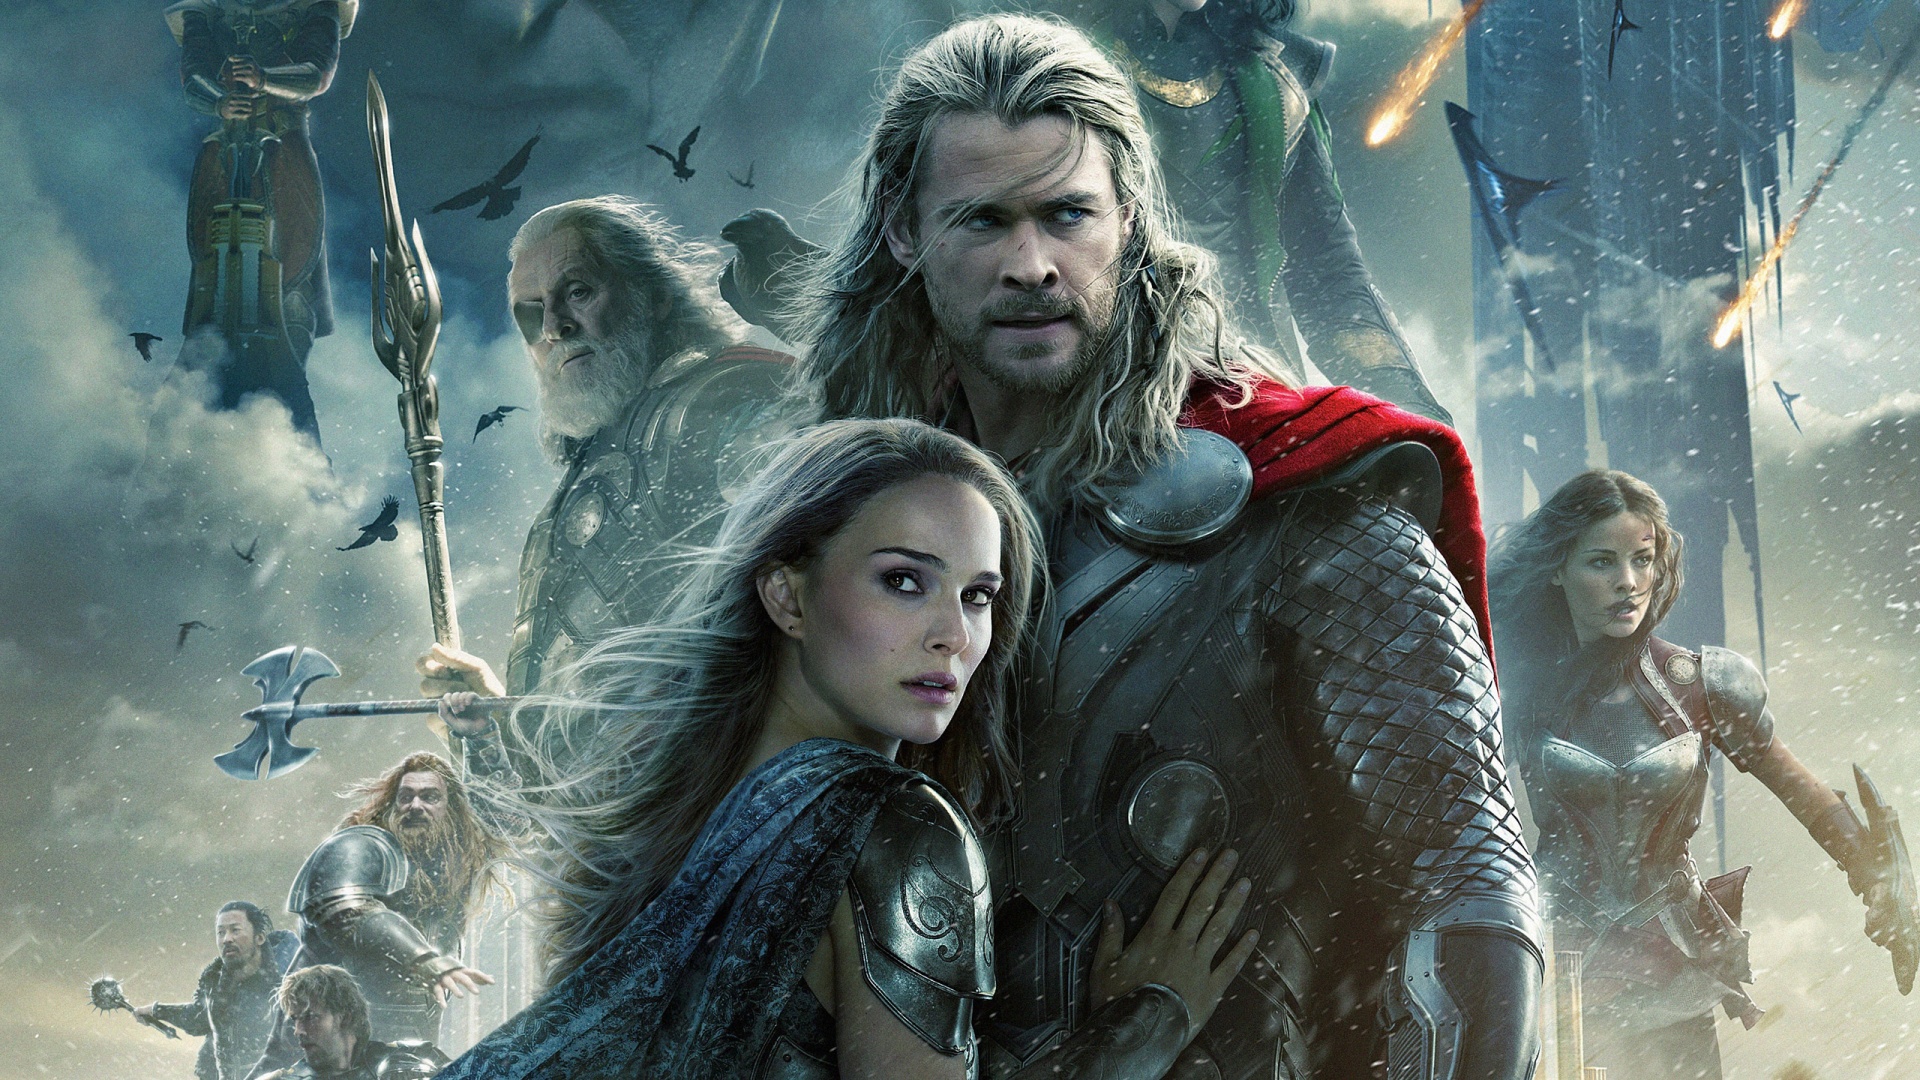 Free download Marvel Live action Movies image thor dark world HD wallpaper and [1920x1080] for your Desktop, Mobile & Tablet. Explore Marvel Movies Wallpaper. Marvel Movies Wallpaper, Movies Wallpaper, Wallpaper Movies